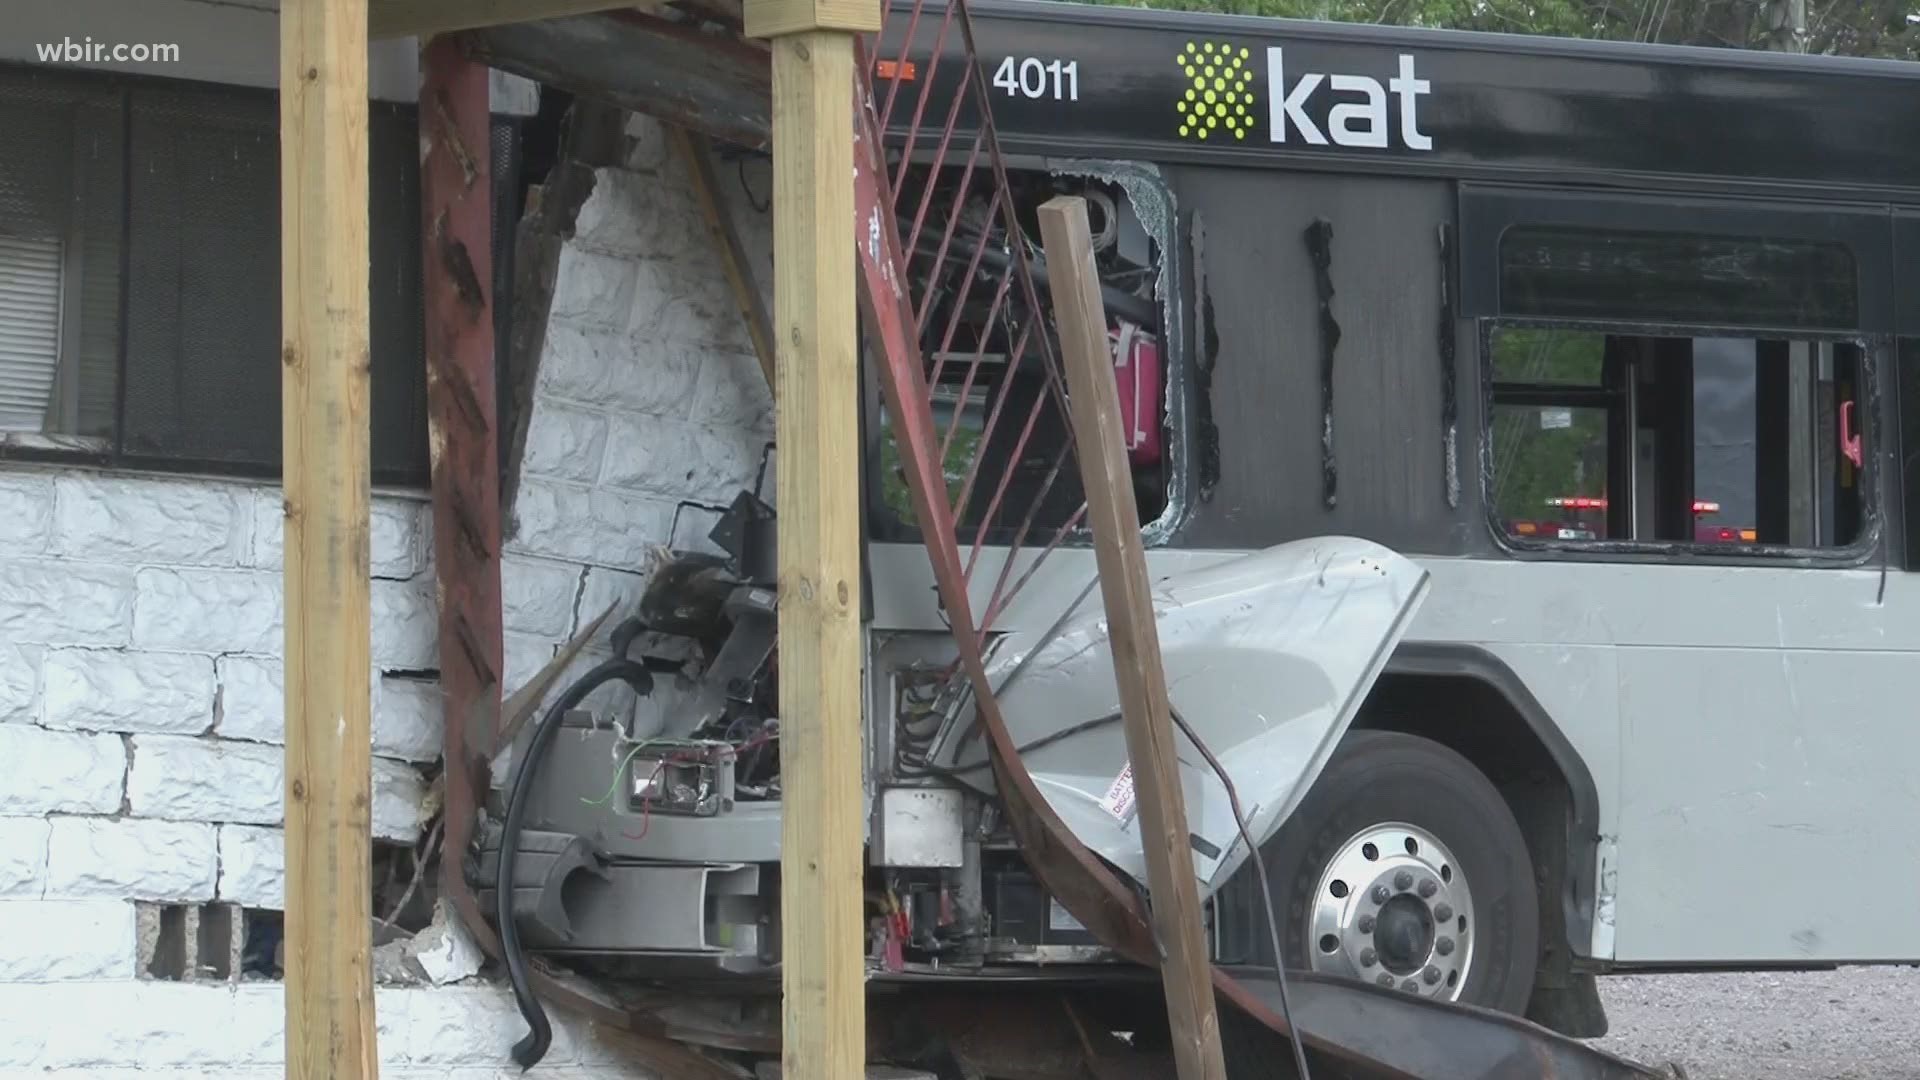 The Knoxville Fire Department said two people were hurt after a KAT bus and a FedEx truck crashed in North Knoxville.